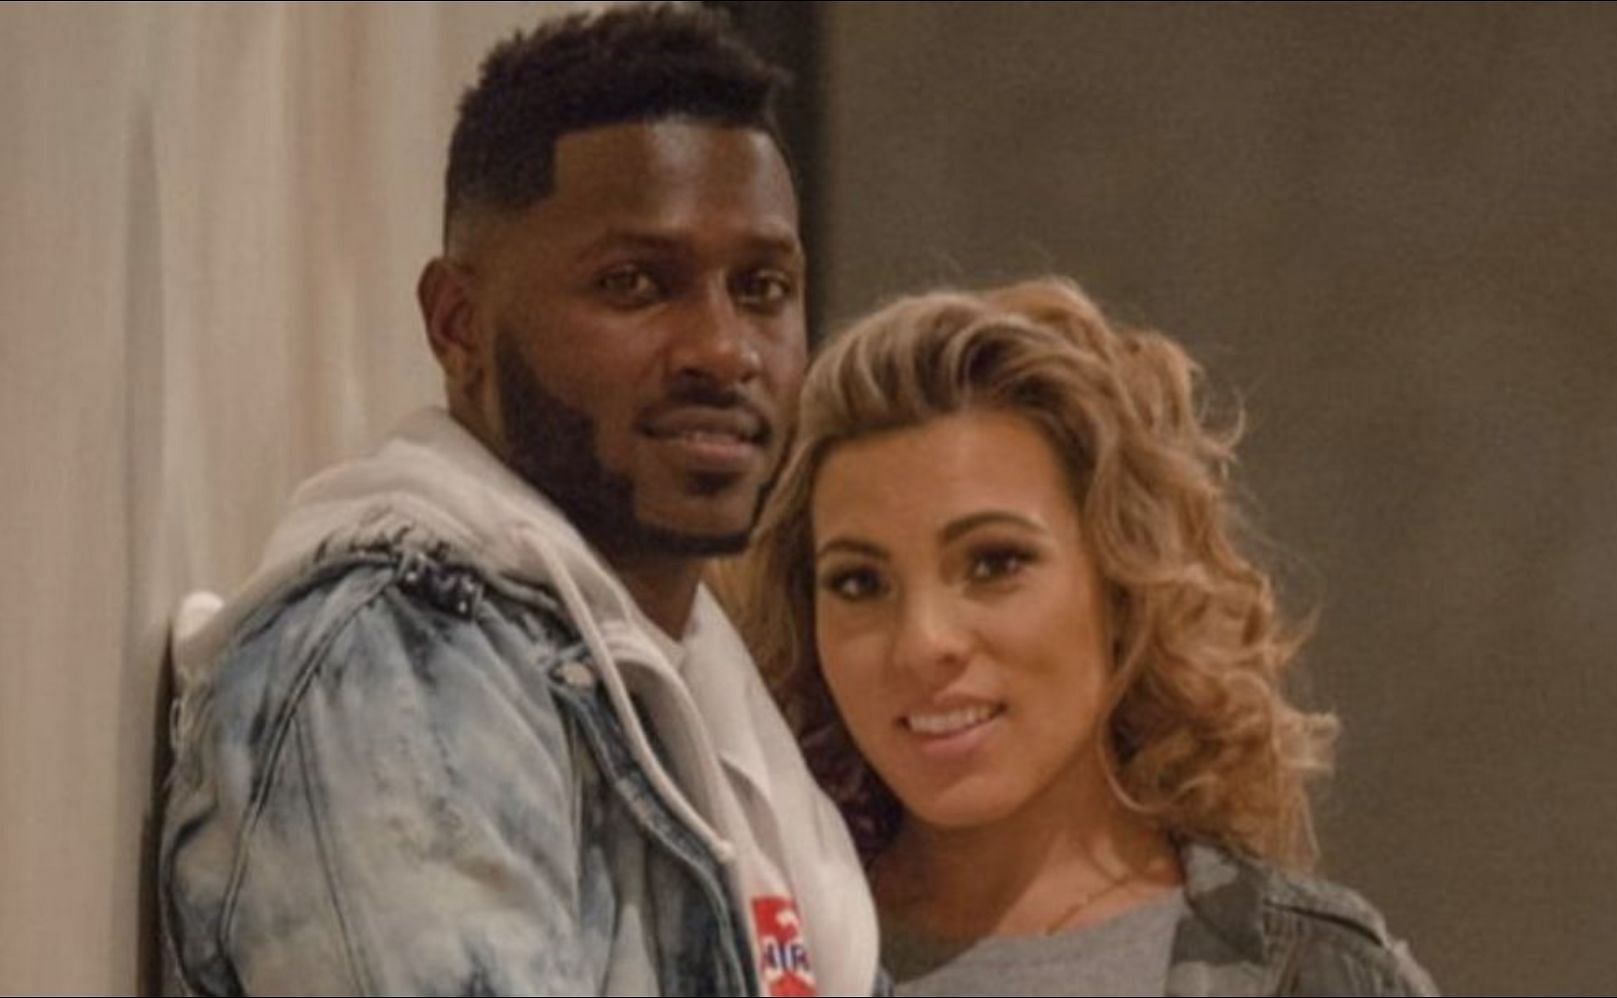 Chelsie Kyriss Snapchat story photos with Antonio Brown on Twitter